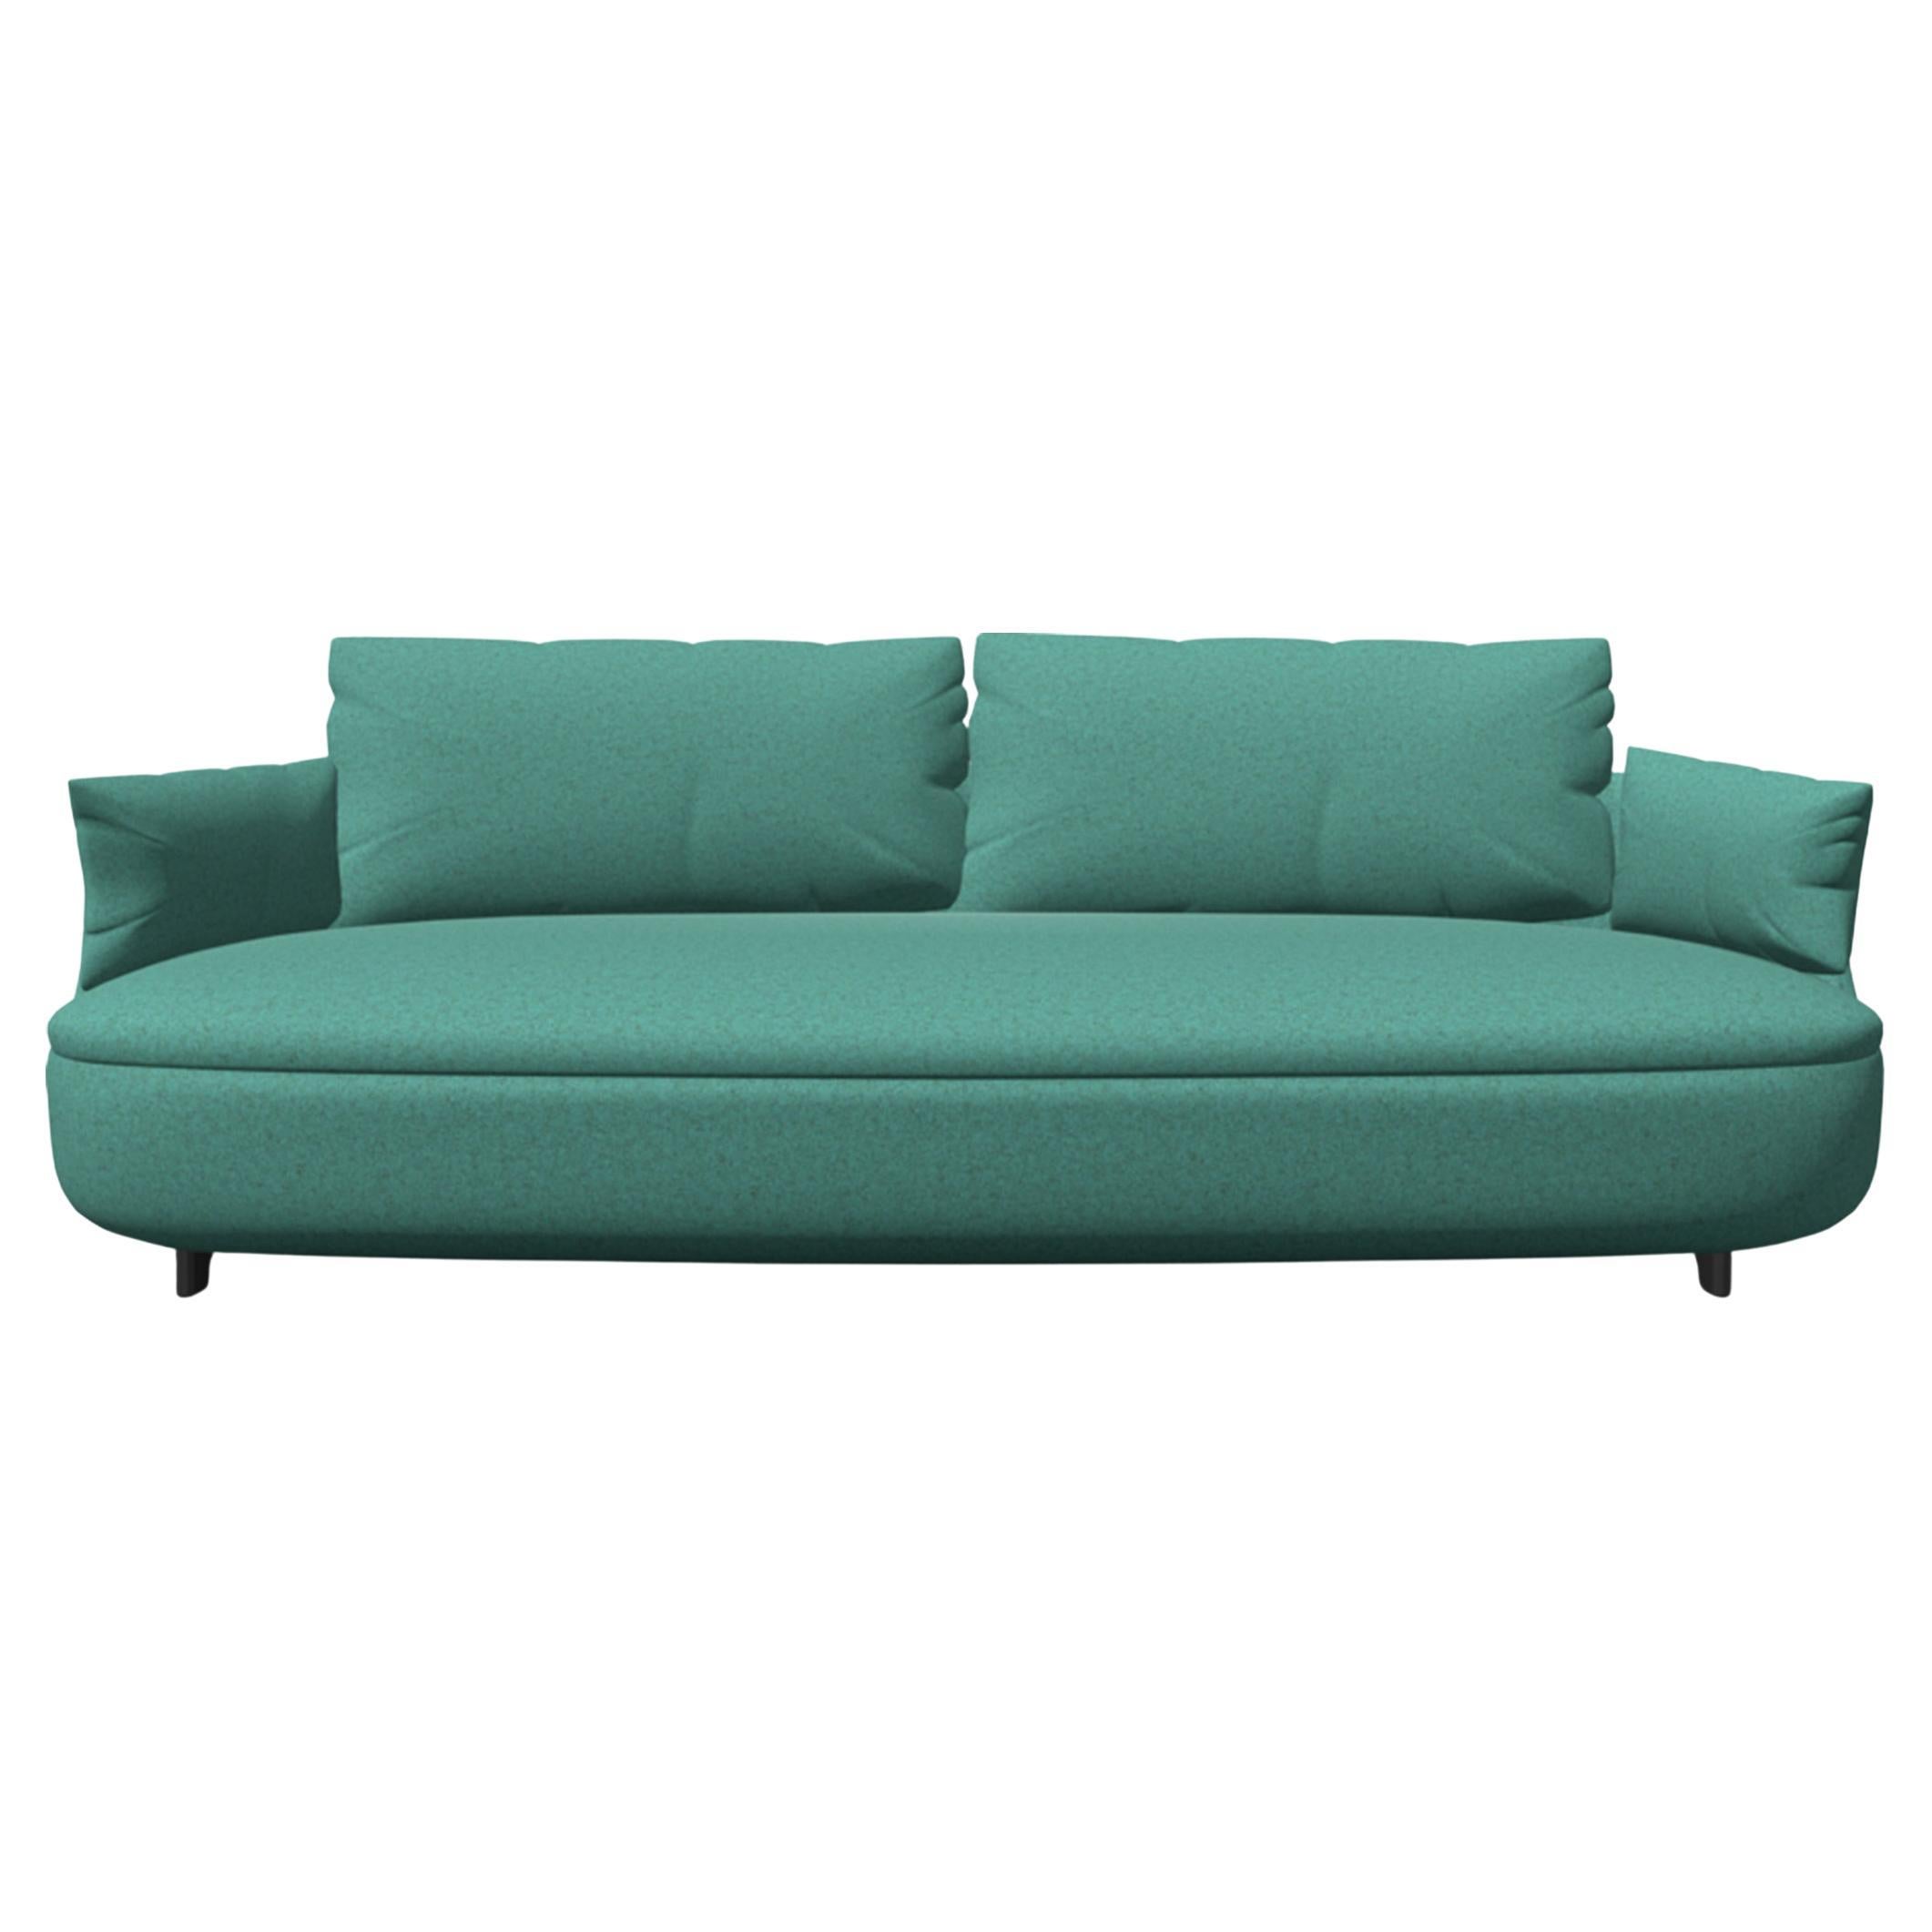 Moooi Bart Canape Sofa in Tonica 2, 933 Green Upholstery